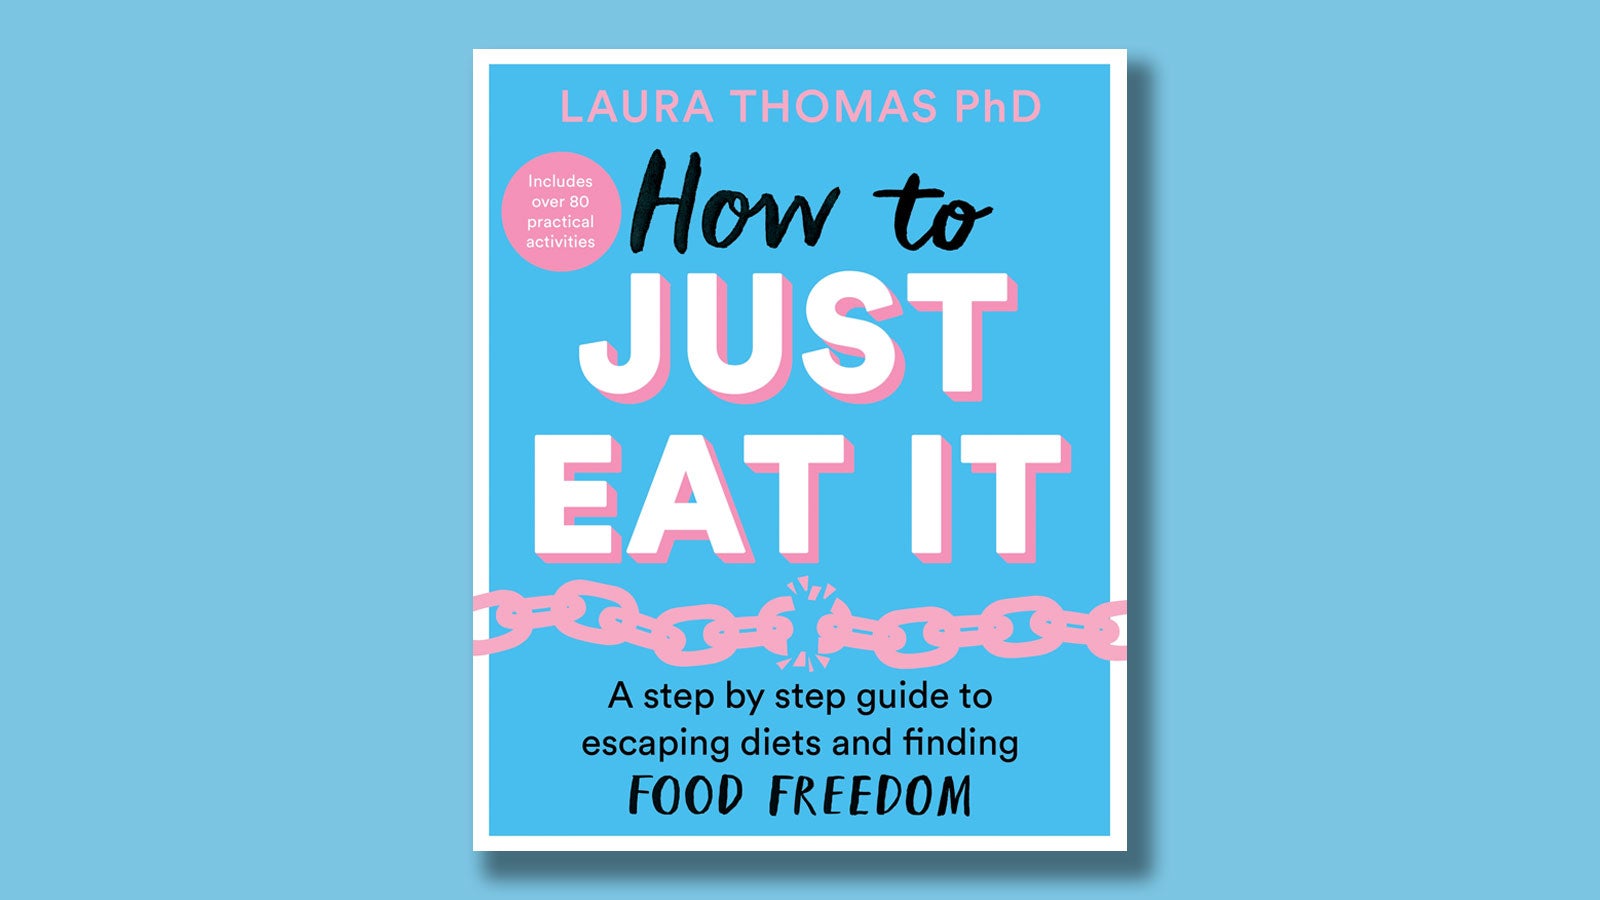 Book jacket of Laura Thomas's book How to Just Eat It on a blue background